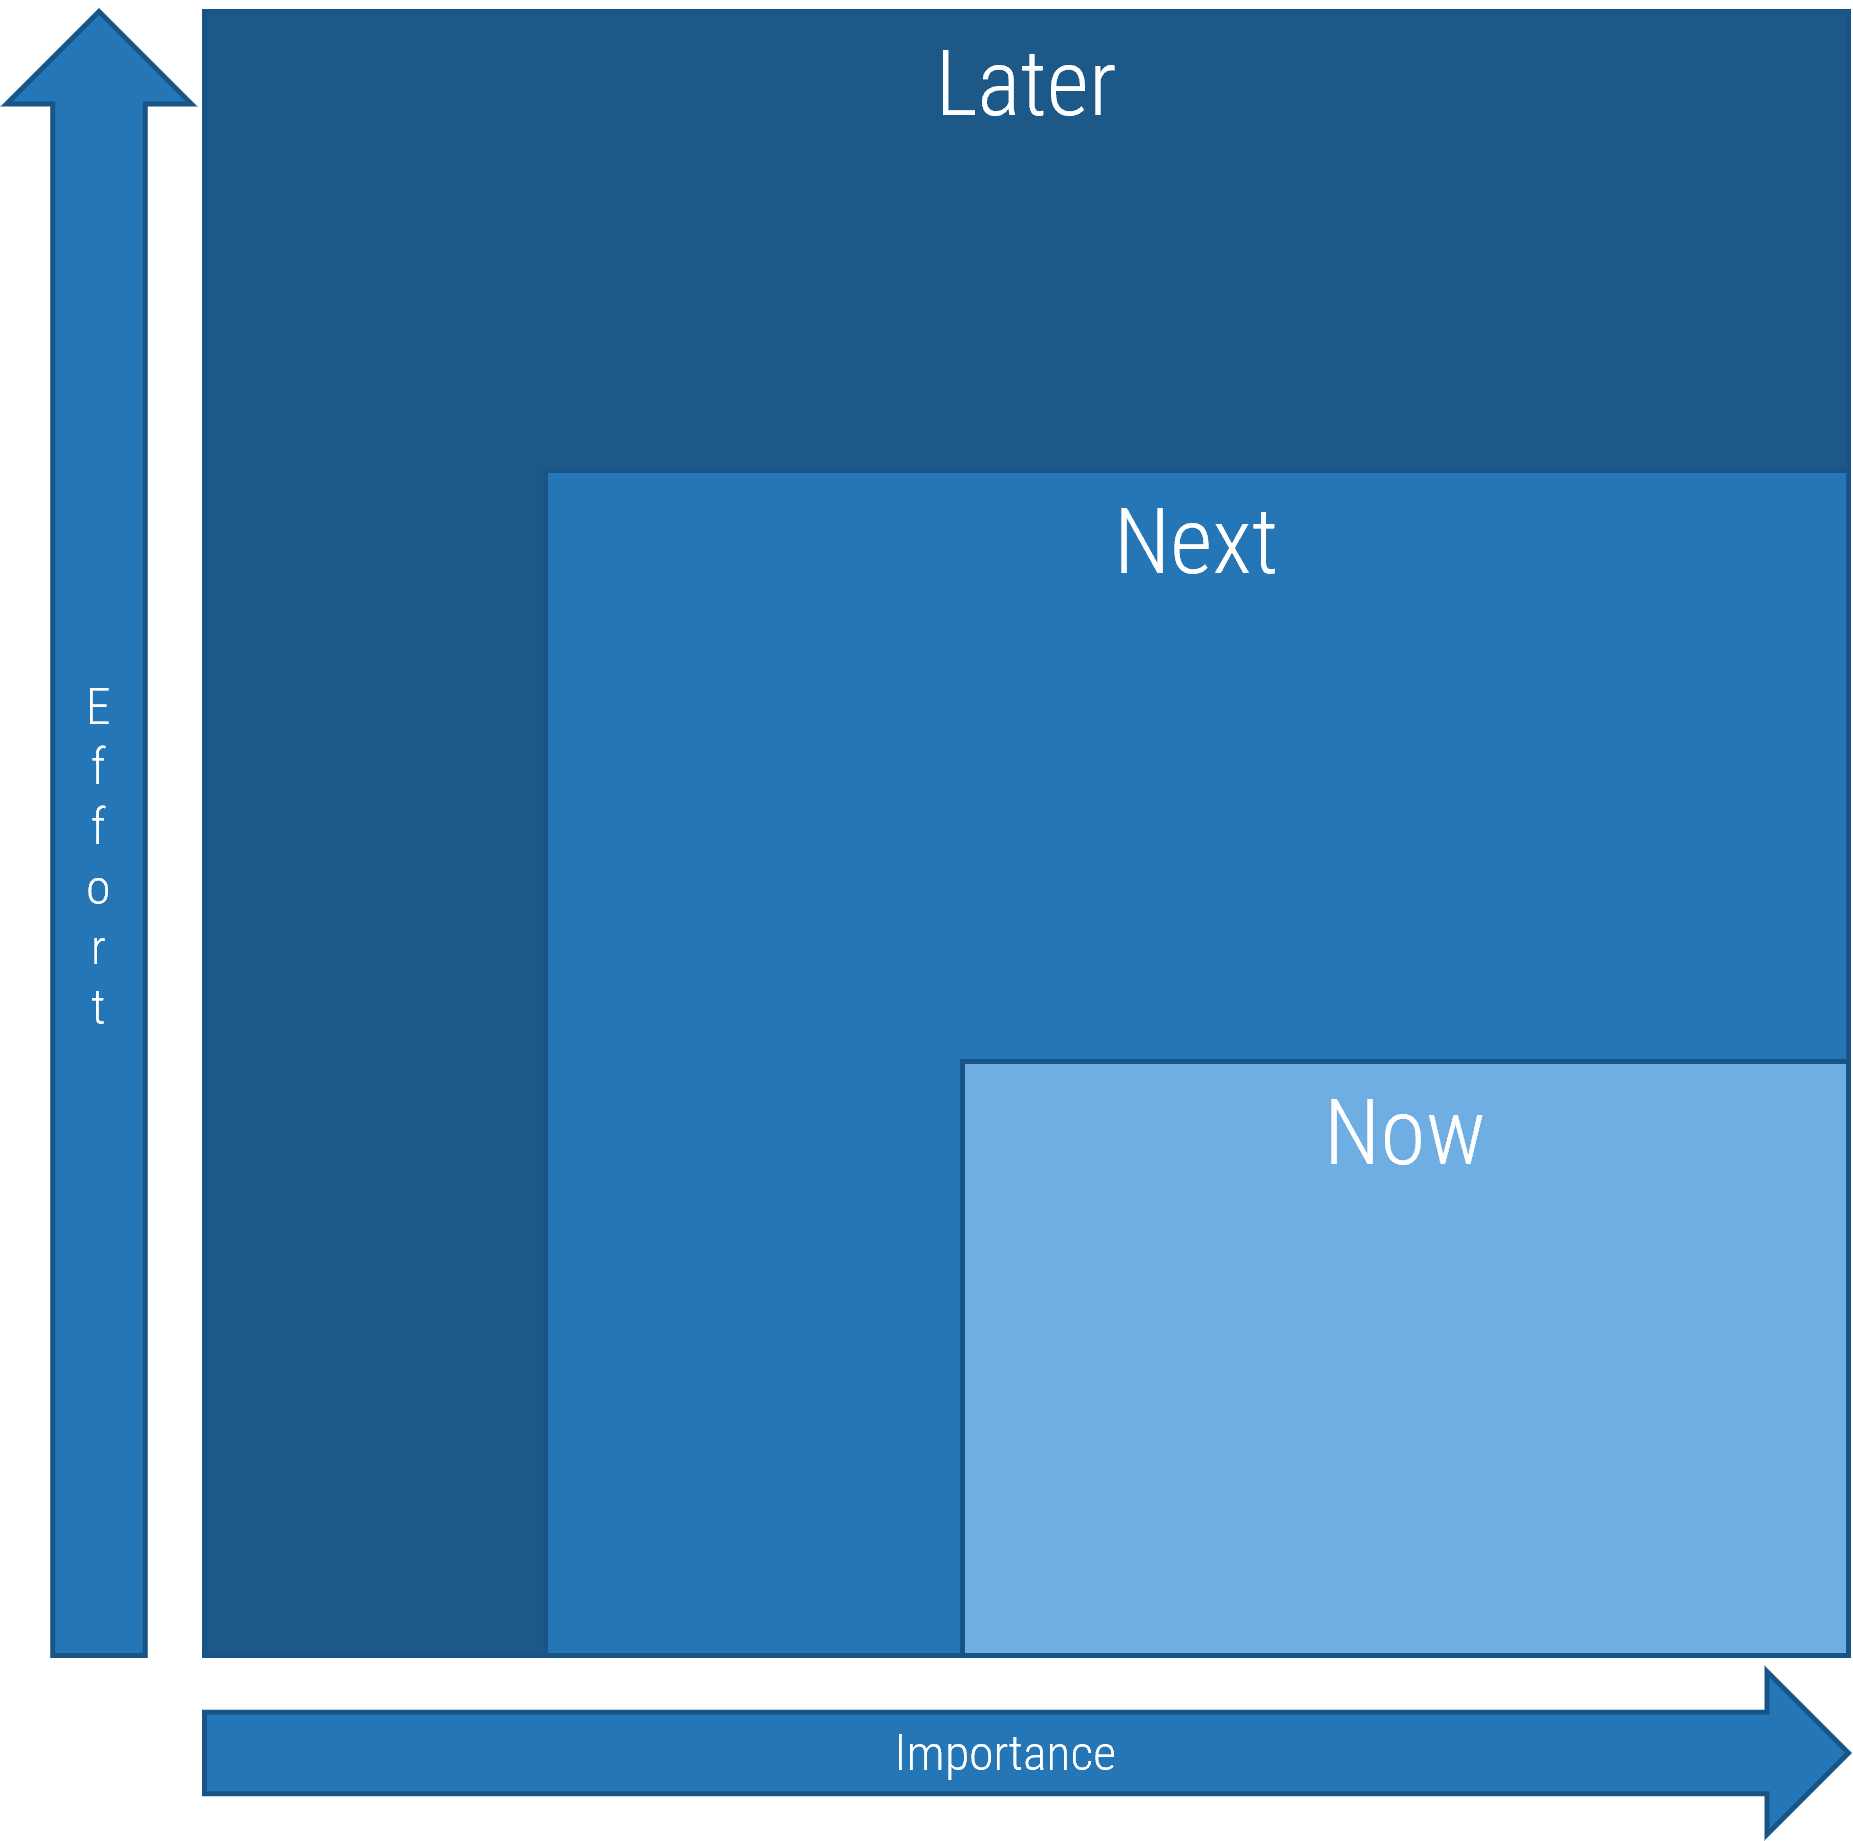 An image of the now - next - later roadmap technique.